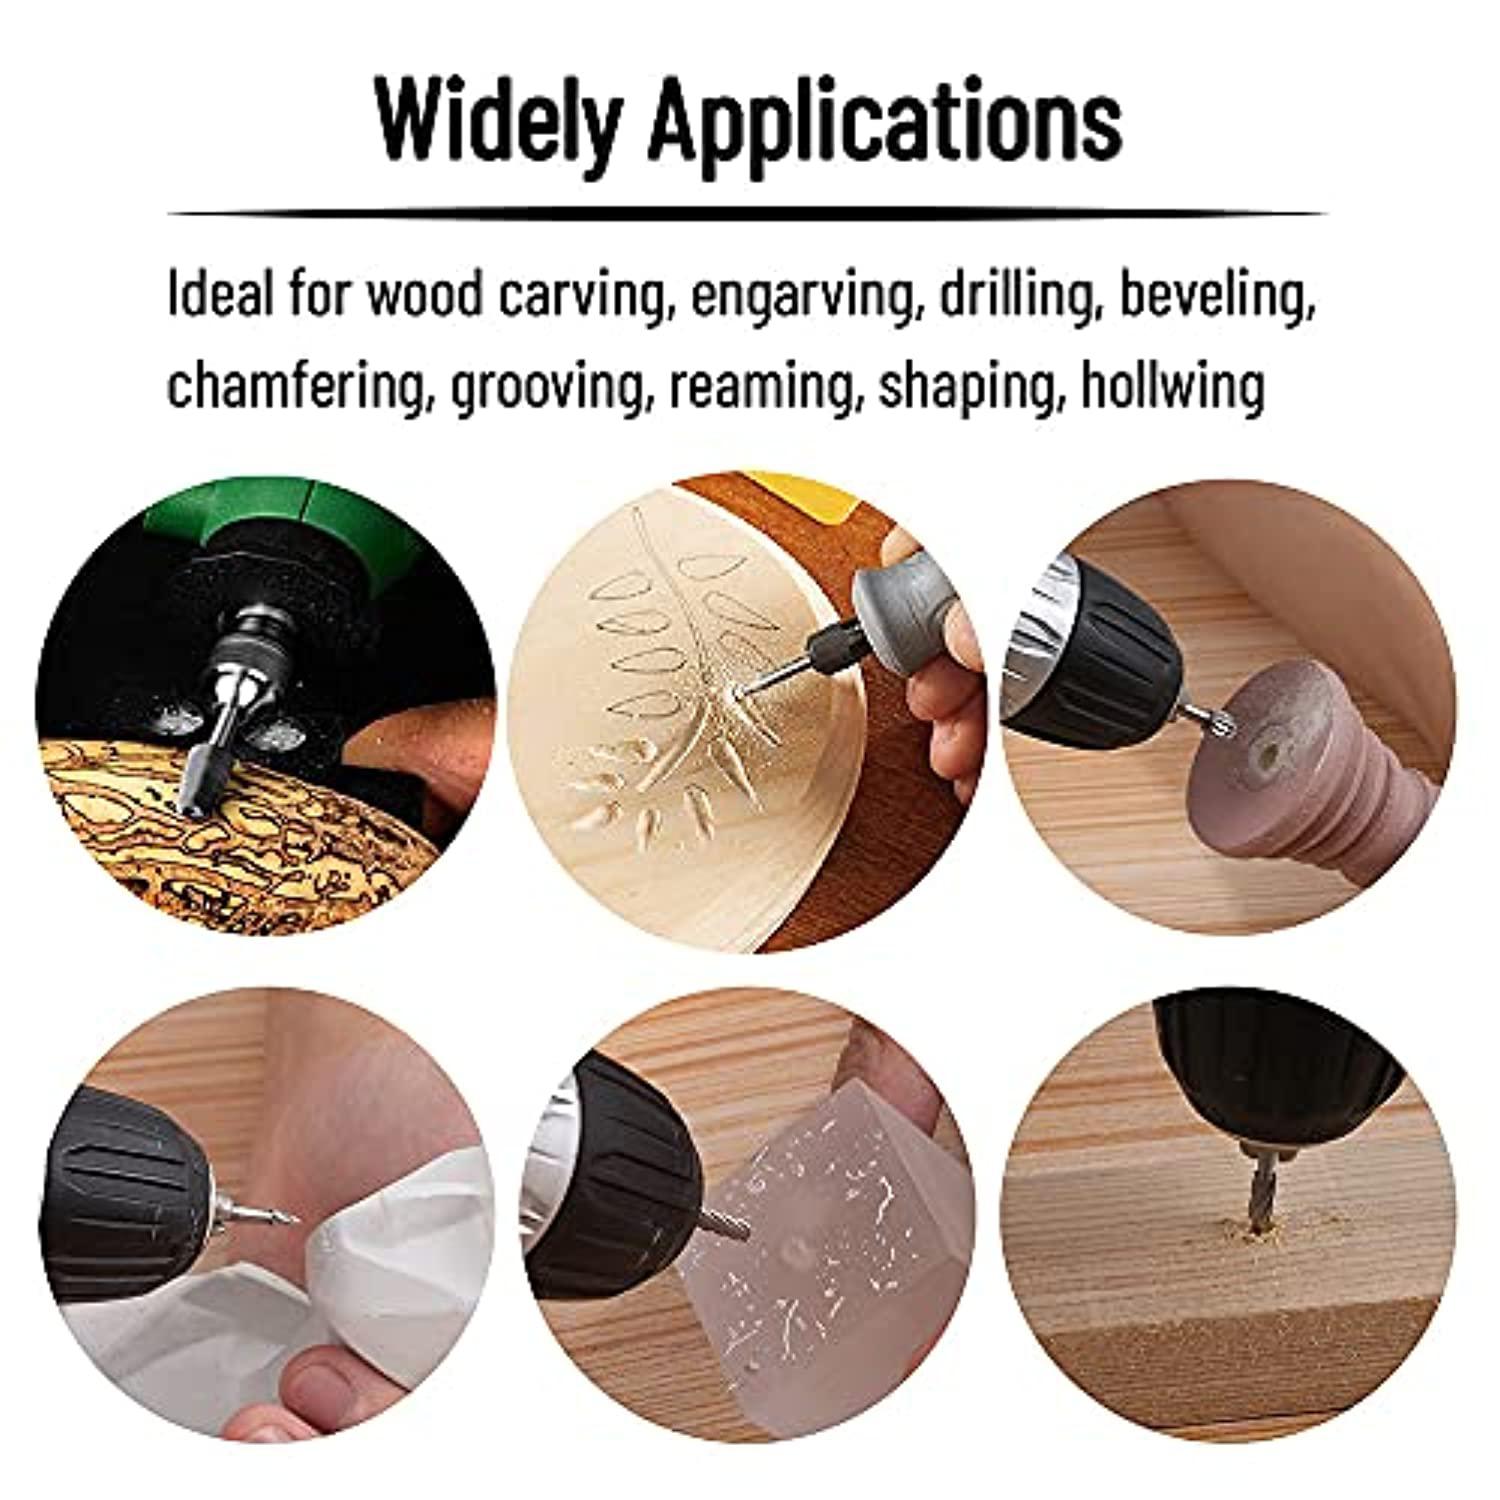 shengbenhao wood carving bit, 20pcs different engraving bit with universal 1/8'' shank rotary tool accessories, premium material, suitabl